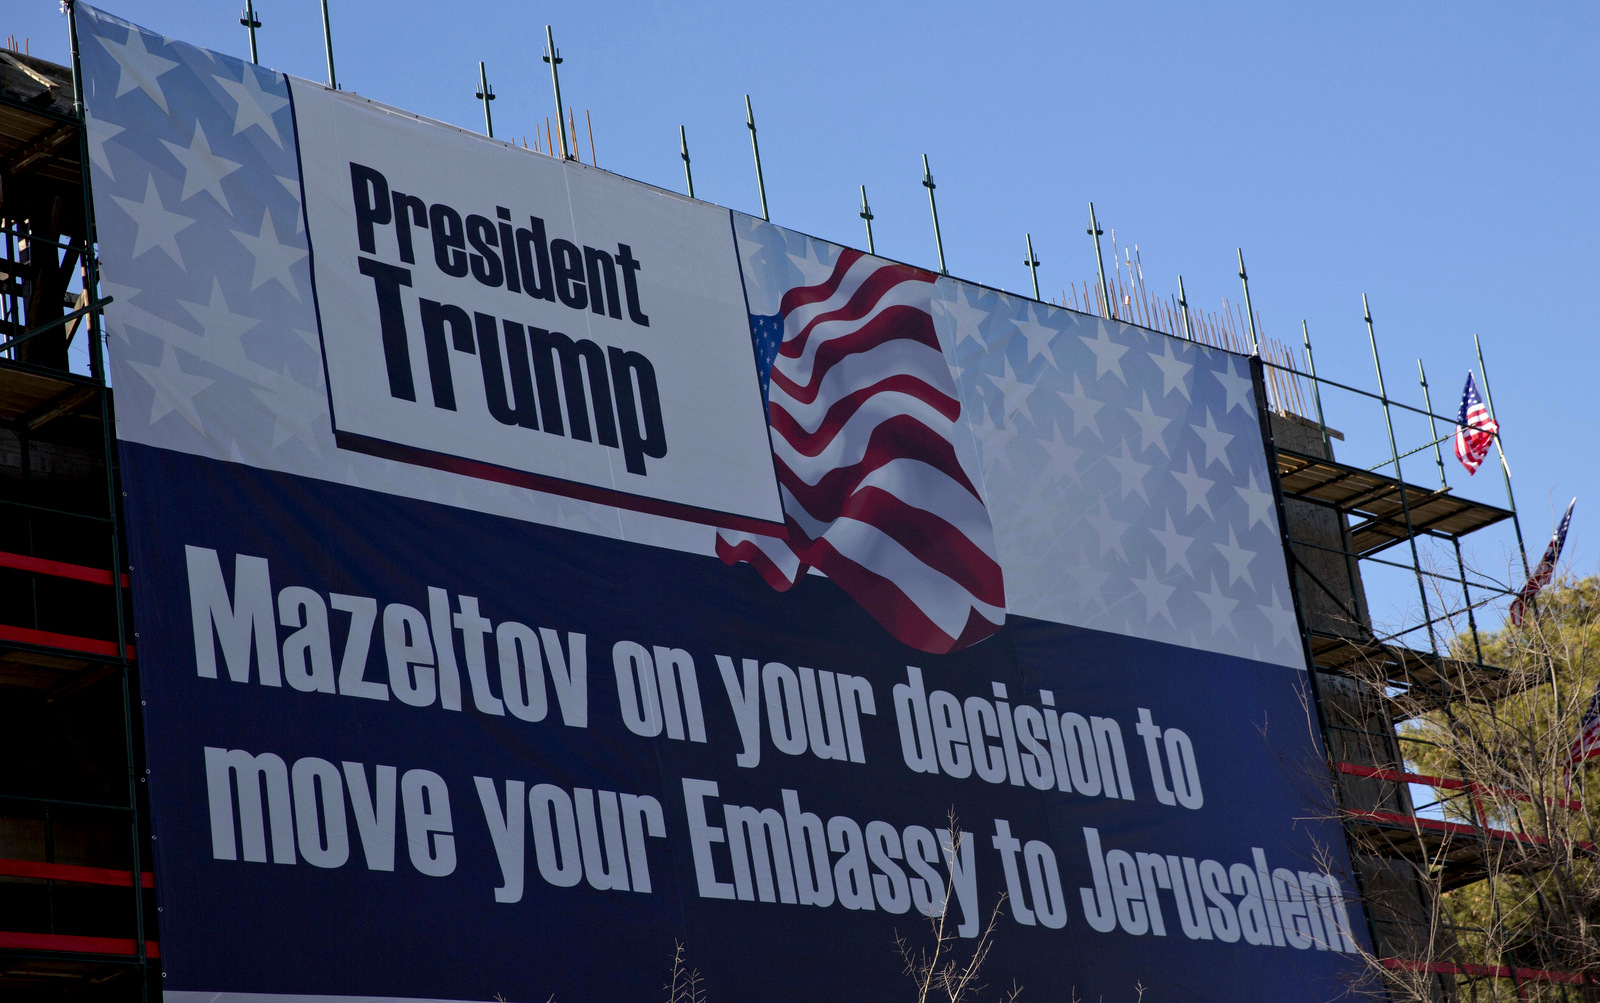 A sign hangs on a building under construction in Jerusalem congratulating U.S. President Donald Trump, Friday, Jan. 20, 2017. Trump has vowed to move the U.S. embassy from Tel Aviv to Jerusalem. (AP/Ariel Schalit)